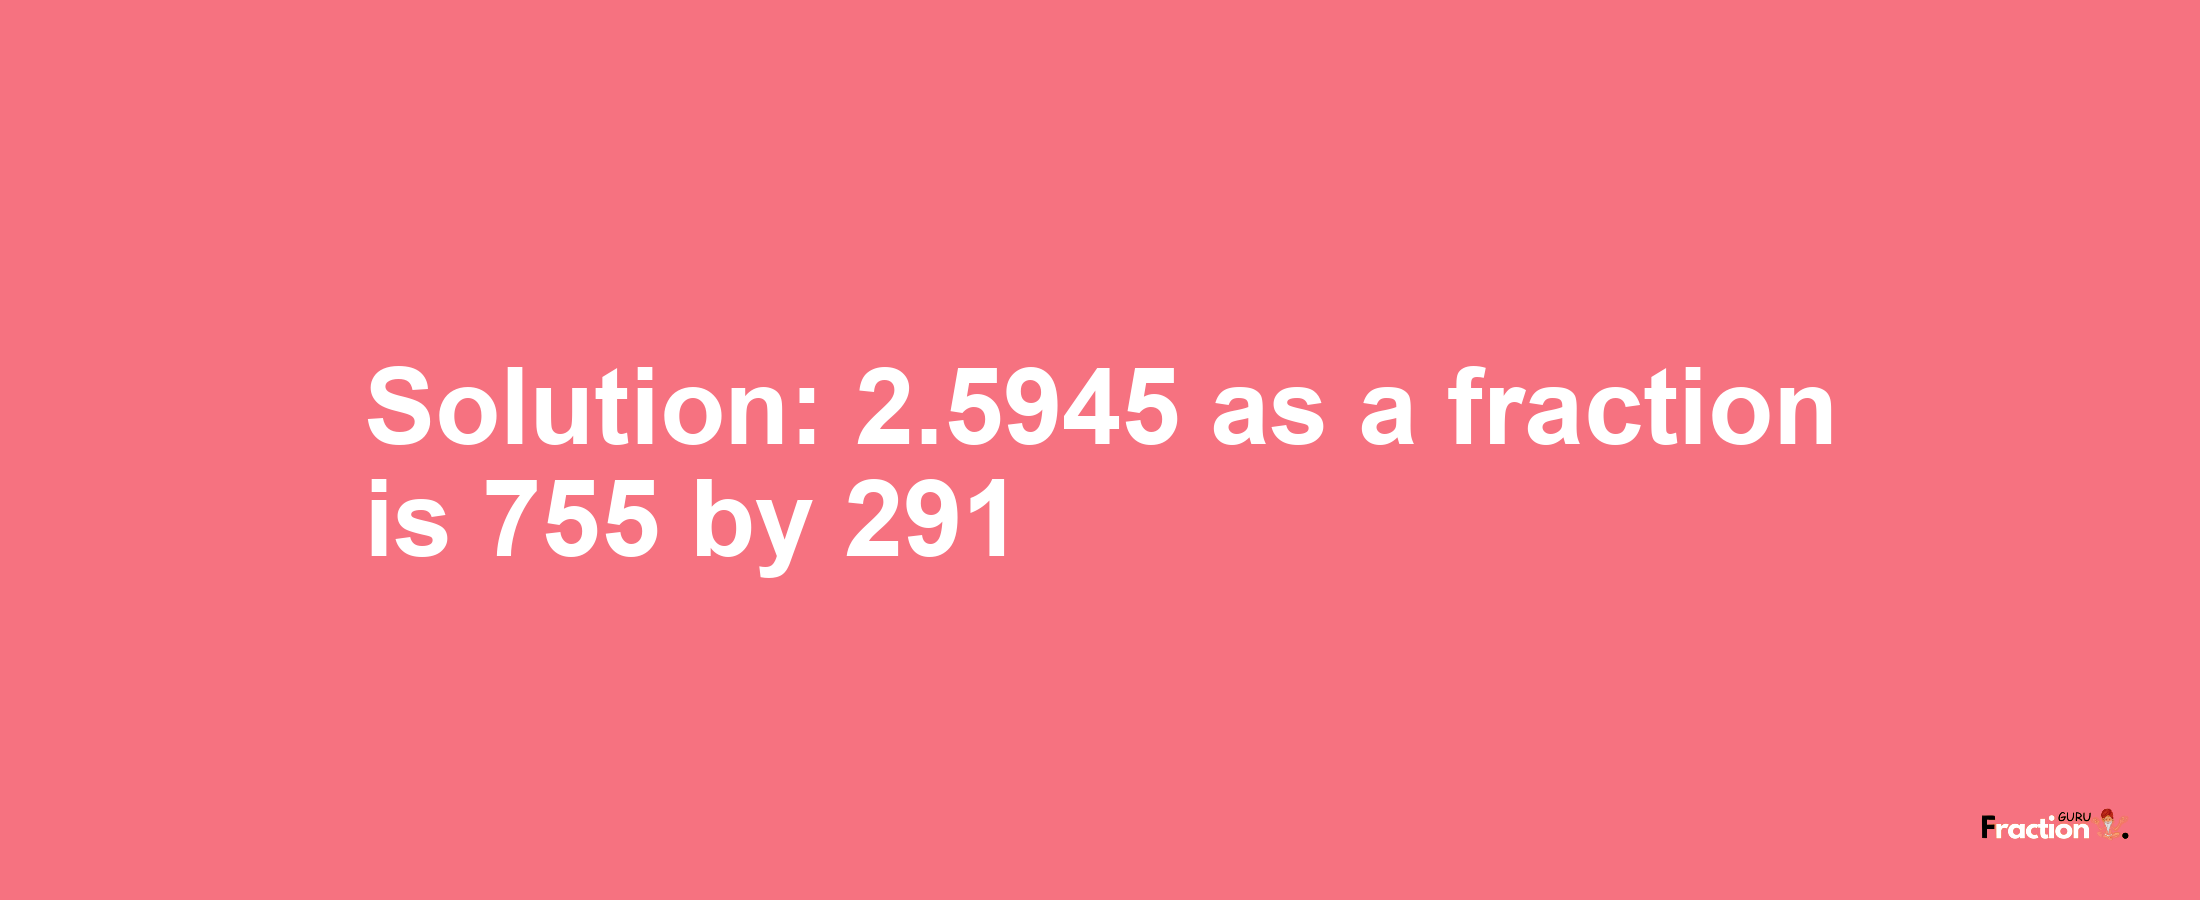 Solution:2.5945 as a fraction is 755/291